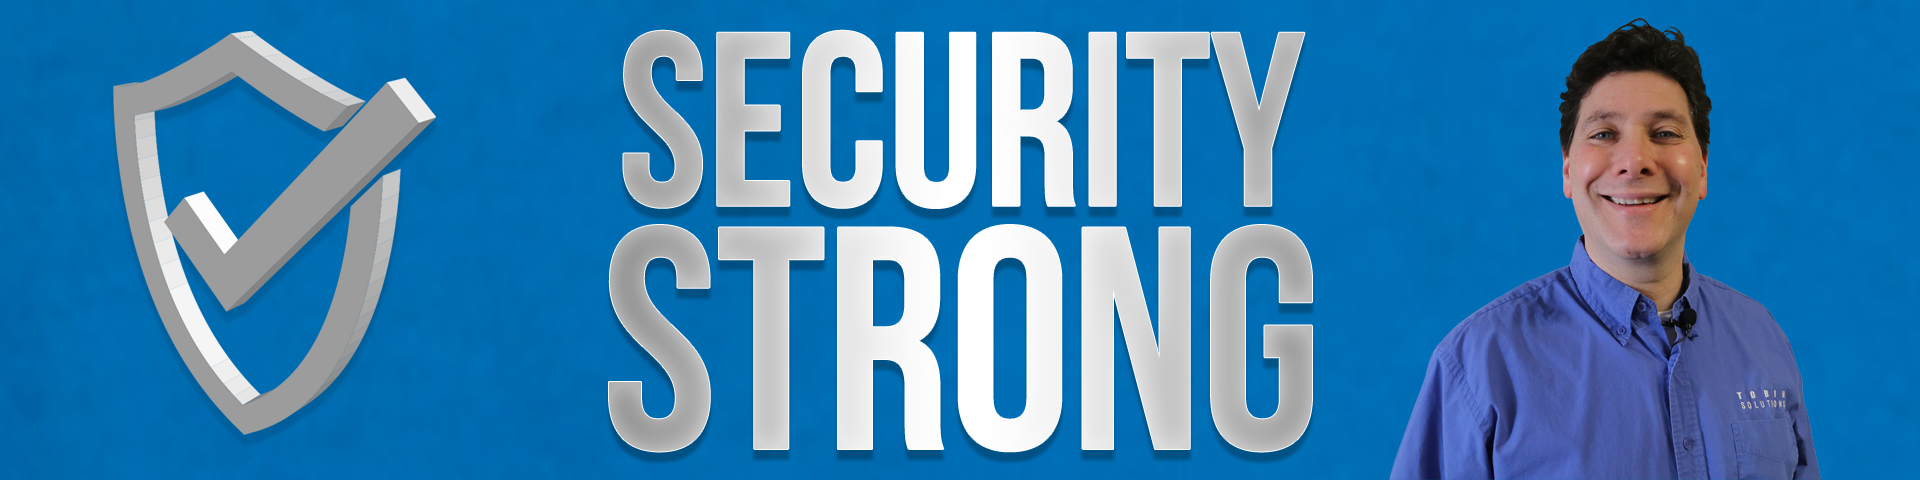 The trade-off for security with Eric Clark